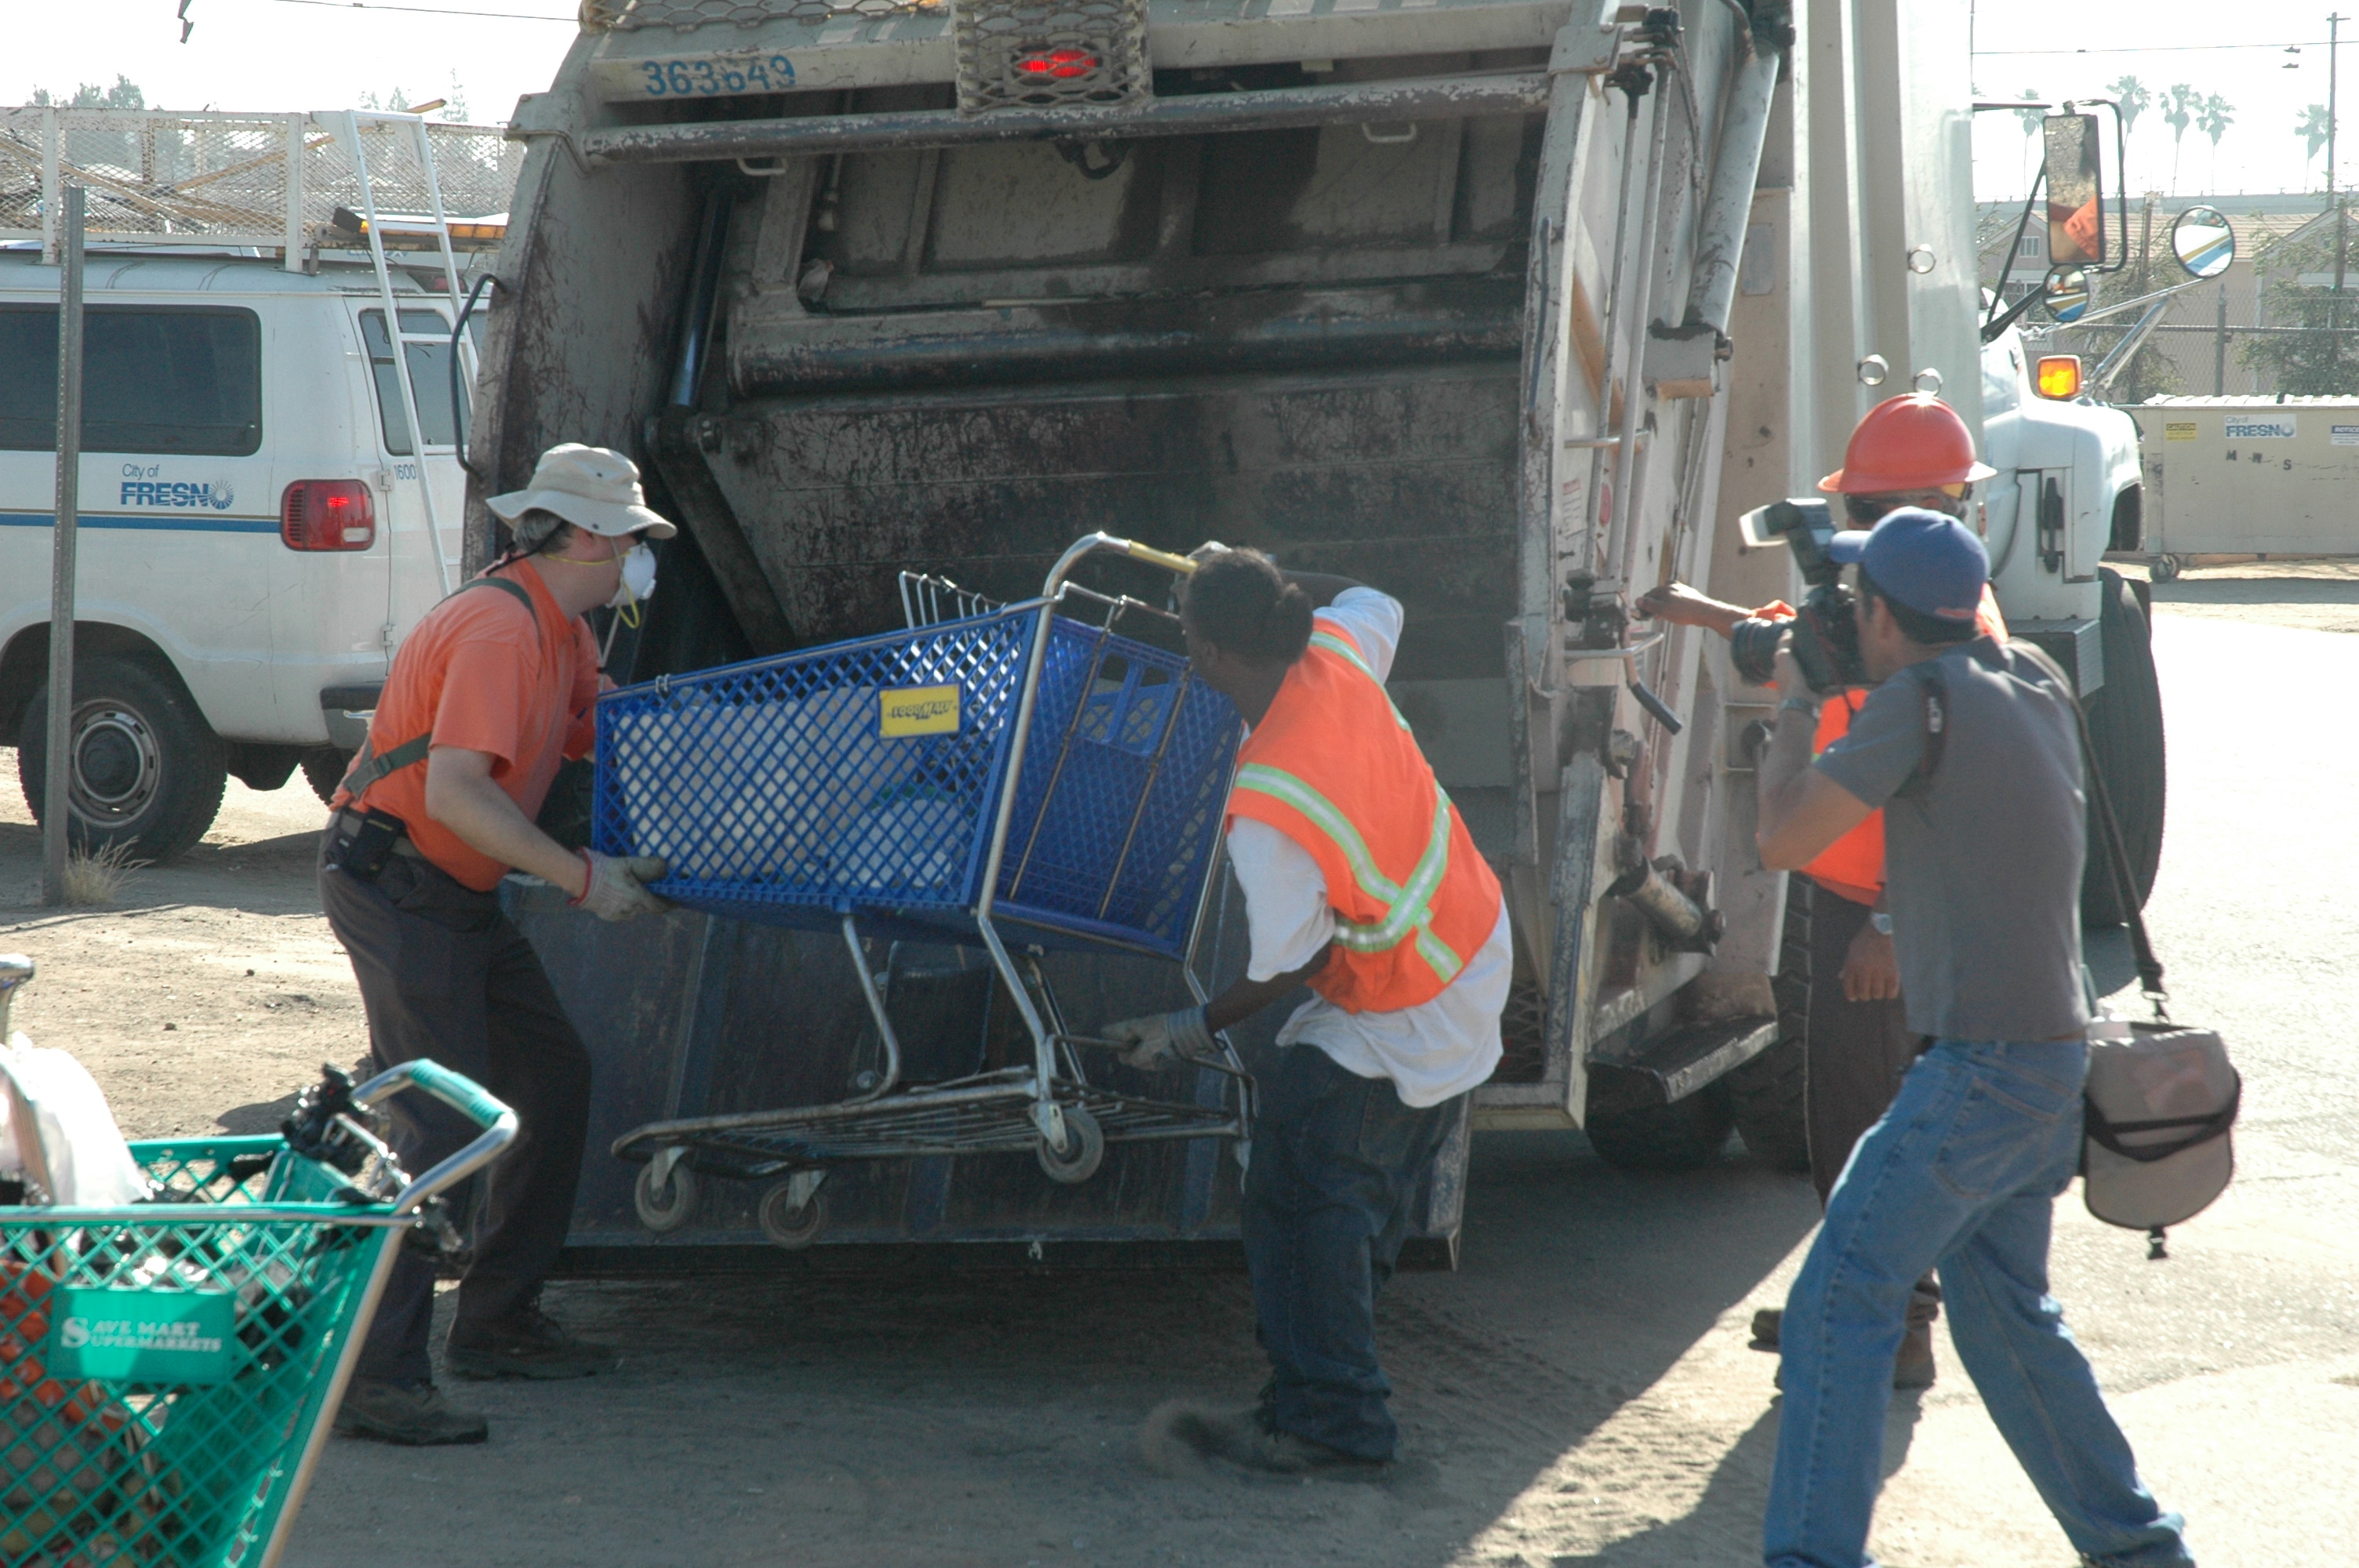 City sanitation workers picked up one shopping cart after another (each filled with homeless people’s property) and put them into the back of a garbage truck. The carts and property were crushed, compacted and taken to the dump. One cleanup crew supervisor was overheard saying, “I wish I had a nickel for every cart we destroy.” 